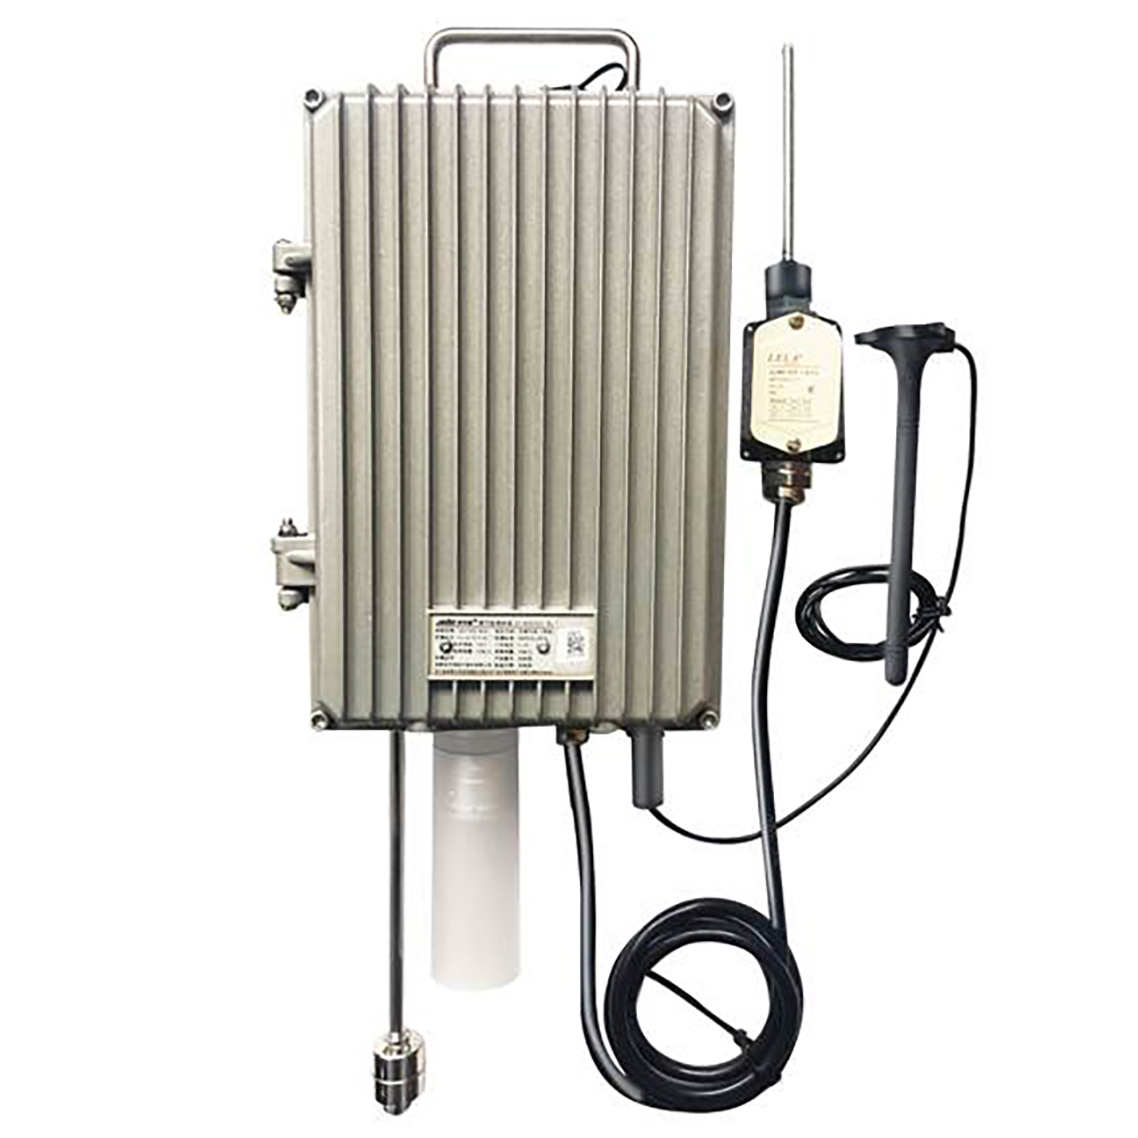 DT-AEC2531 Combustible Gas Monitoring Device for Underground Well Room